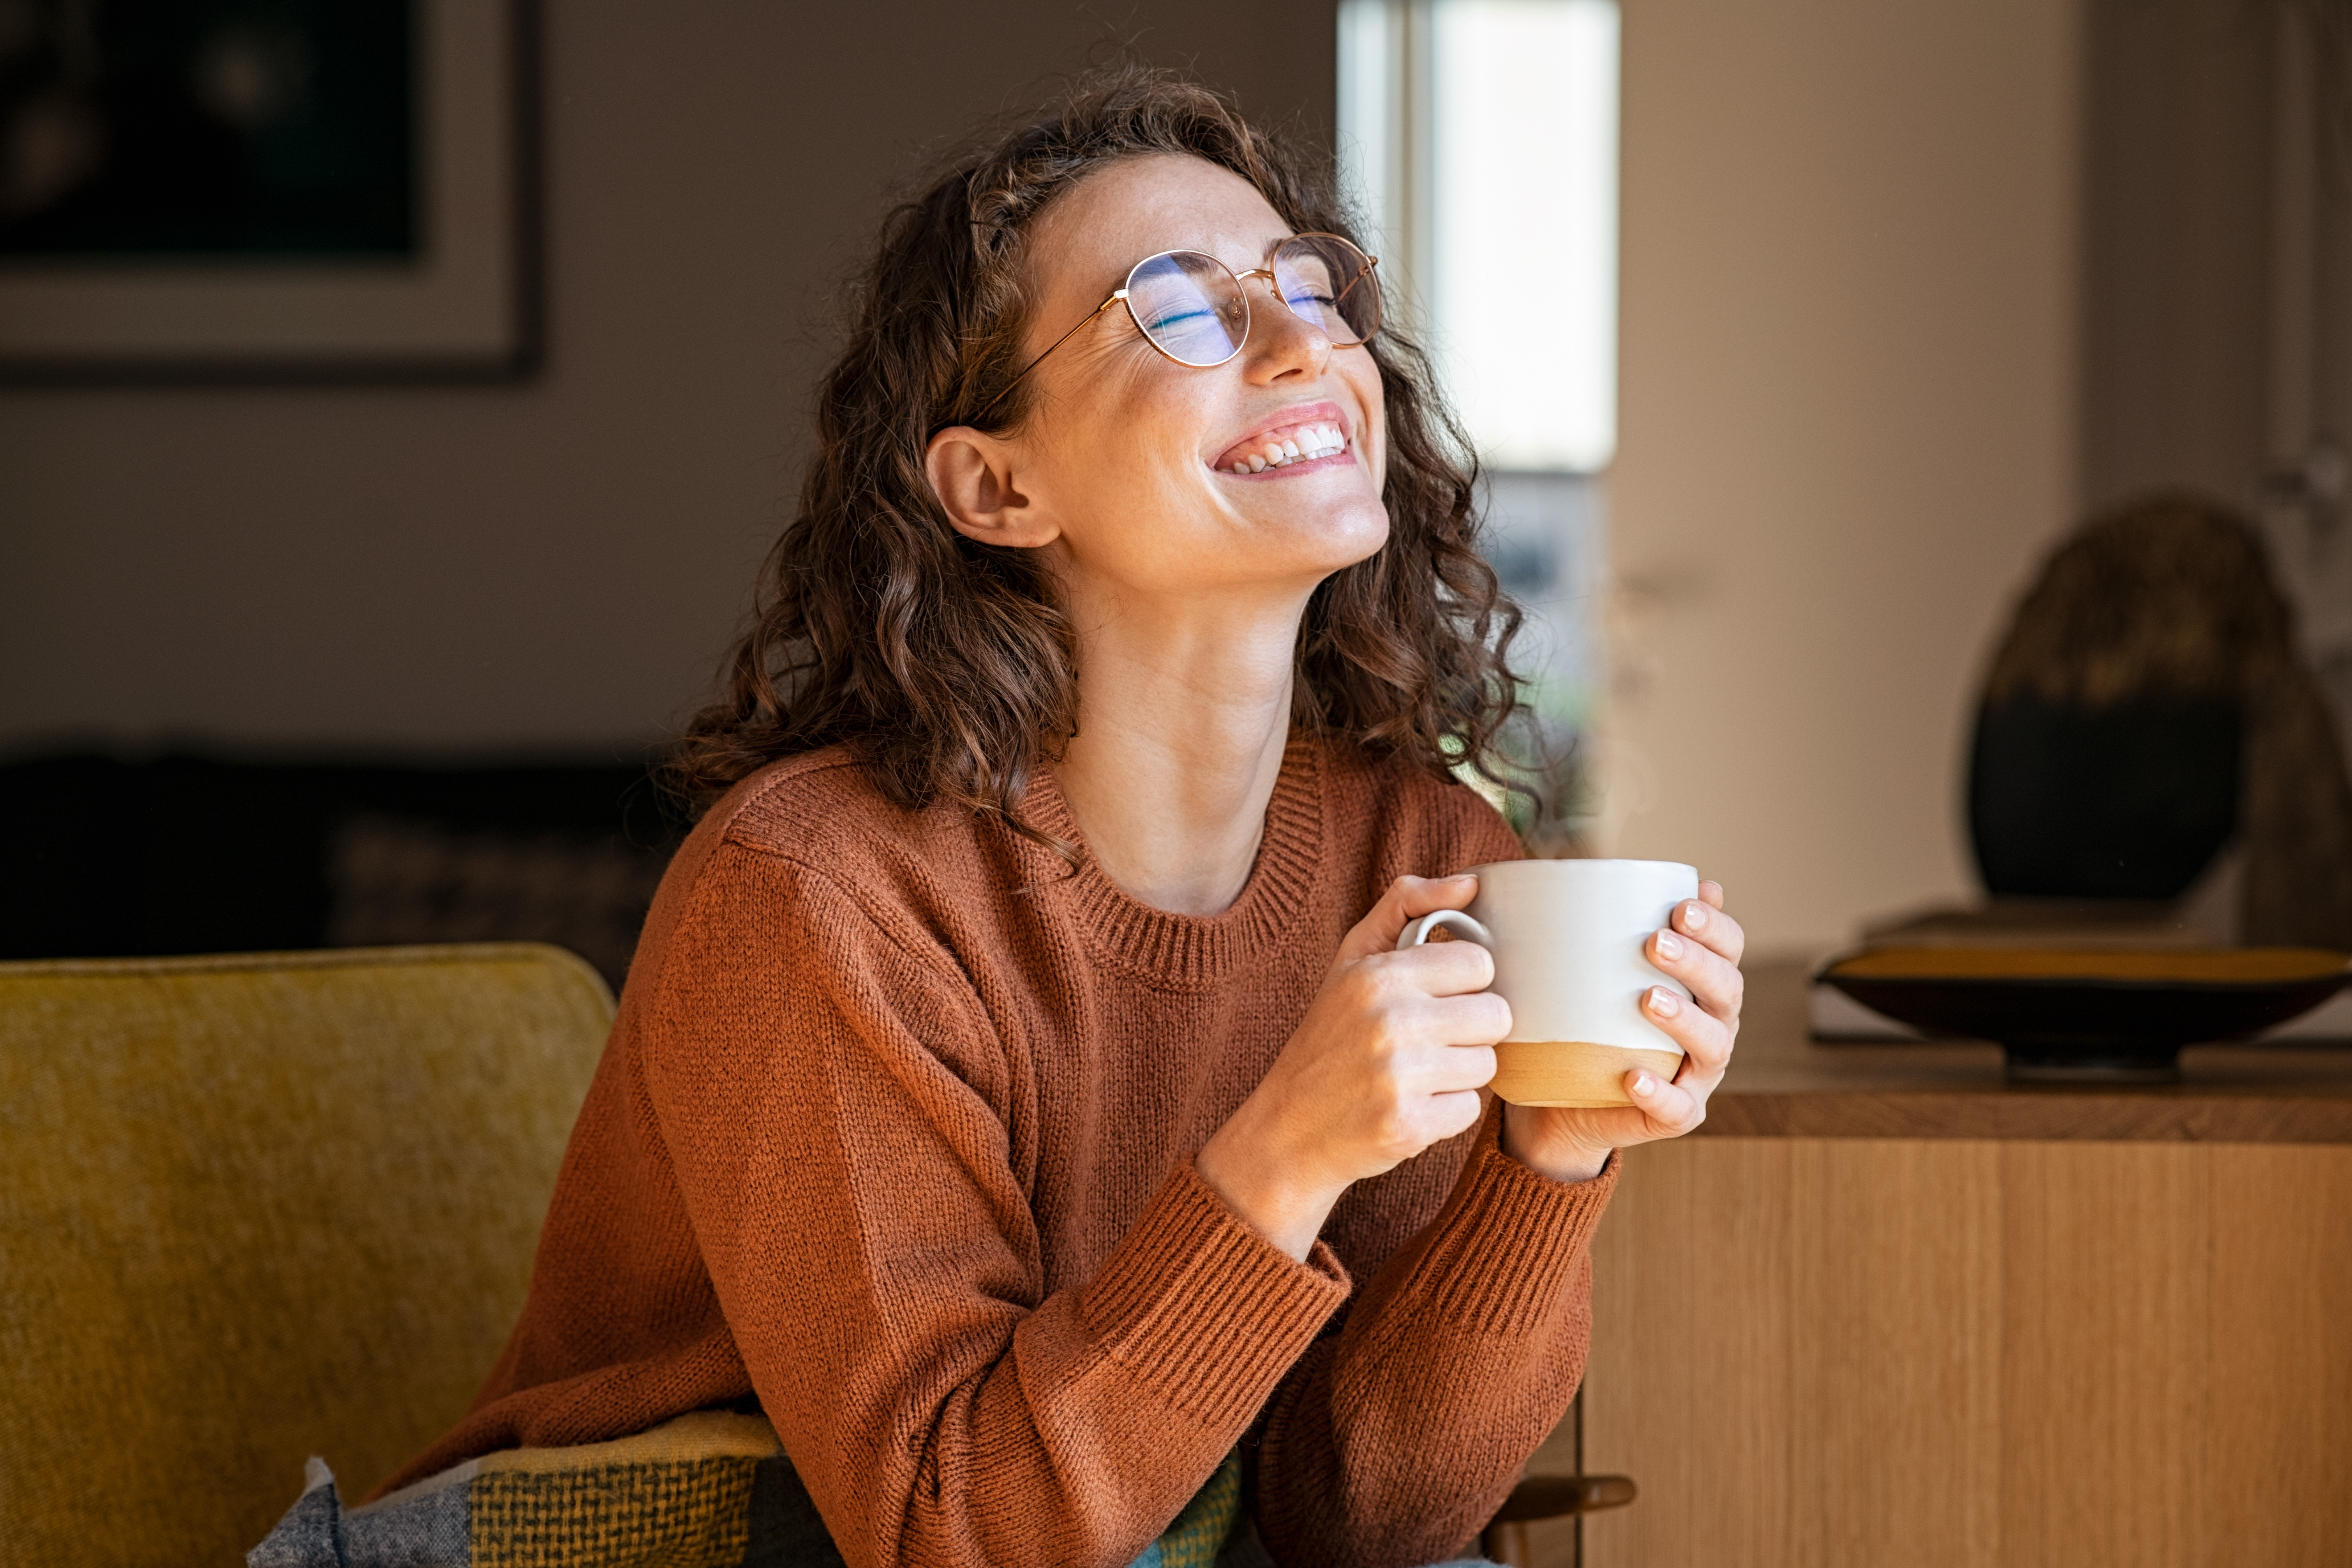 Happy woman sitting with a cup | Shutterstock